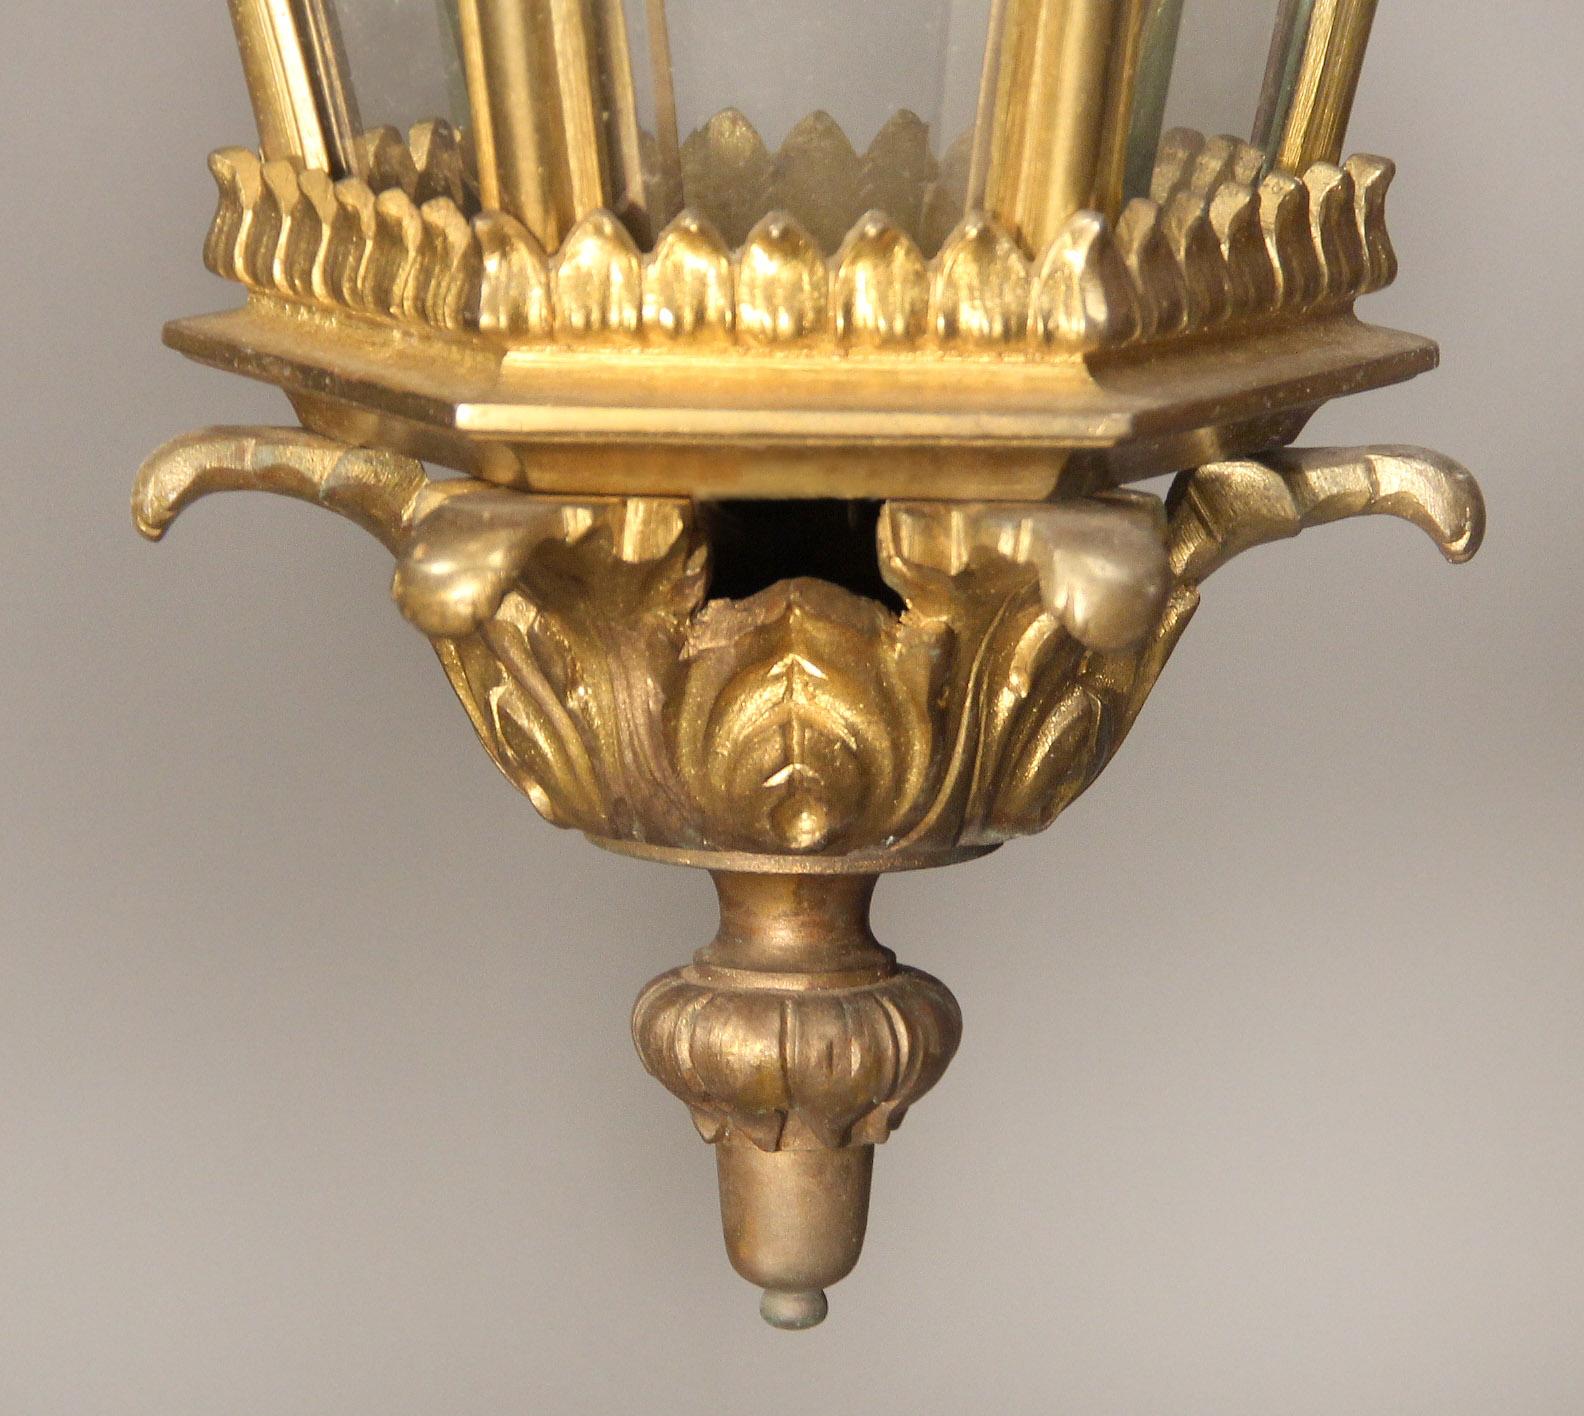 French Late 19th/Early 20th Century Gilt Bronze and Glass ‘Versailles’ Hall Lantern For Sale